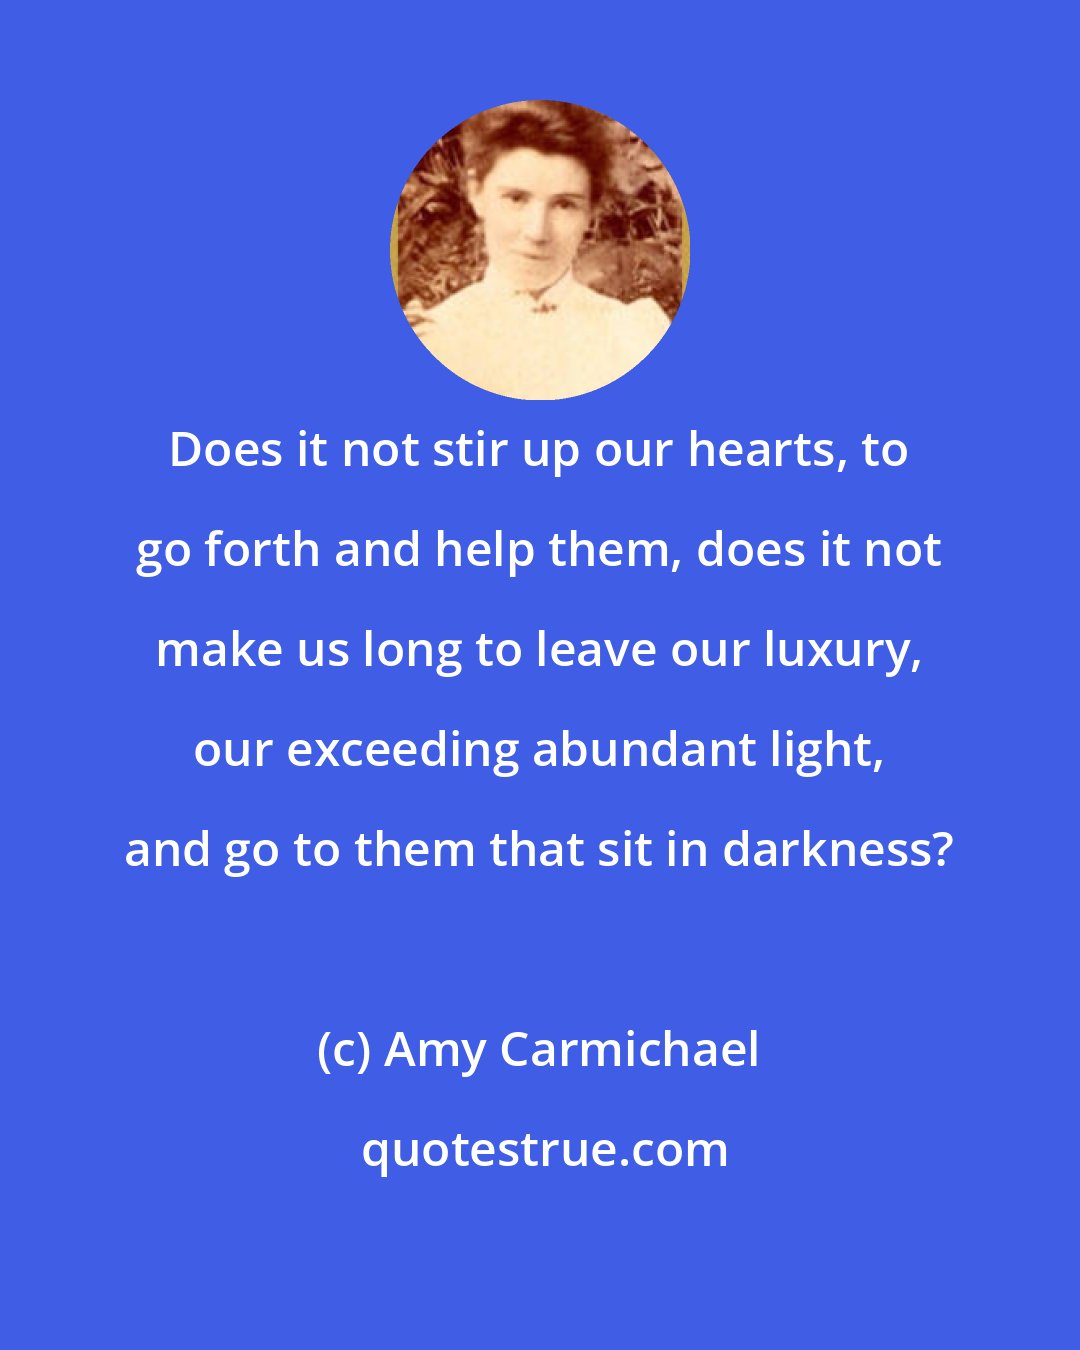 Amy Carmichael: Does it not stir up our hearts, to go forth and help them, does it not make us long to leave our luxury, our exceeding abundant light, and go to them that sit in darkness?